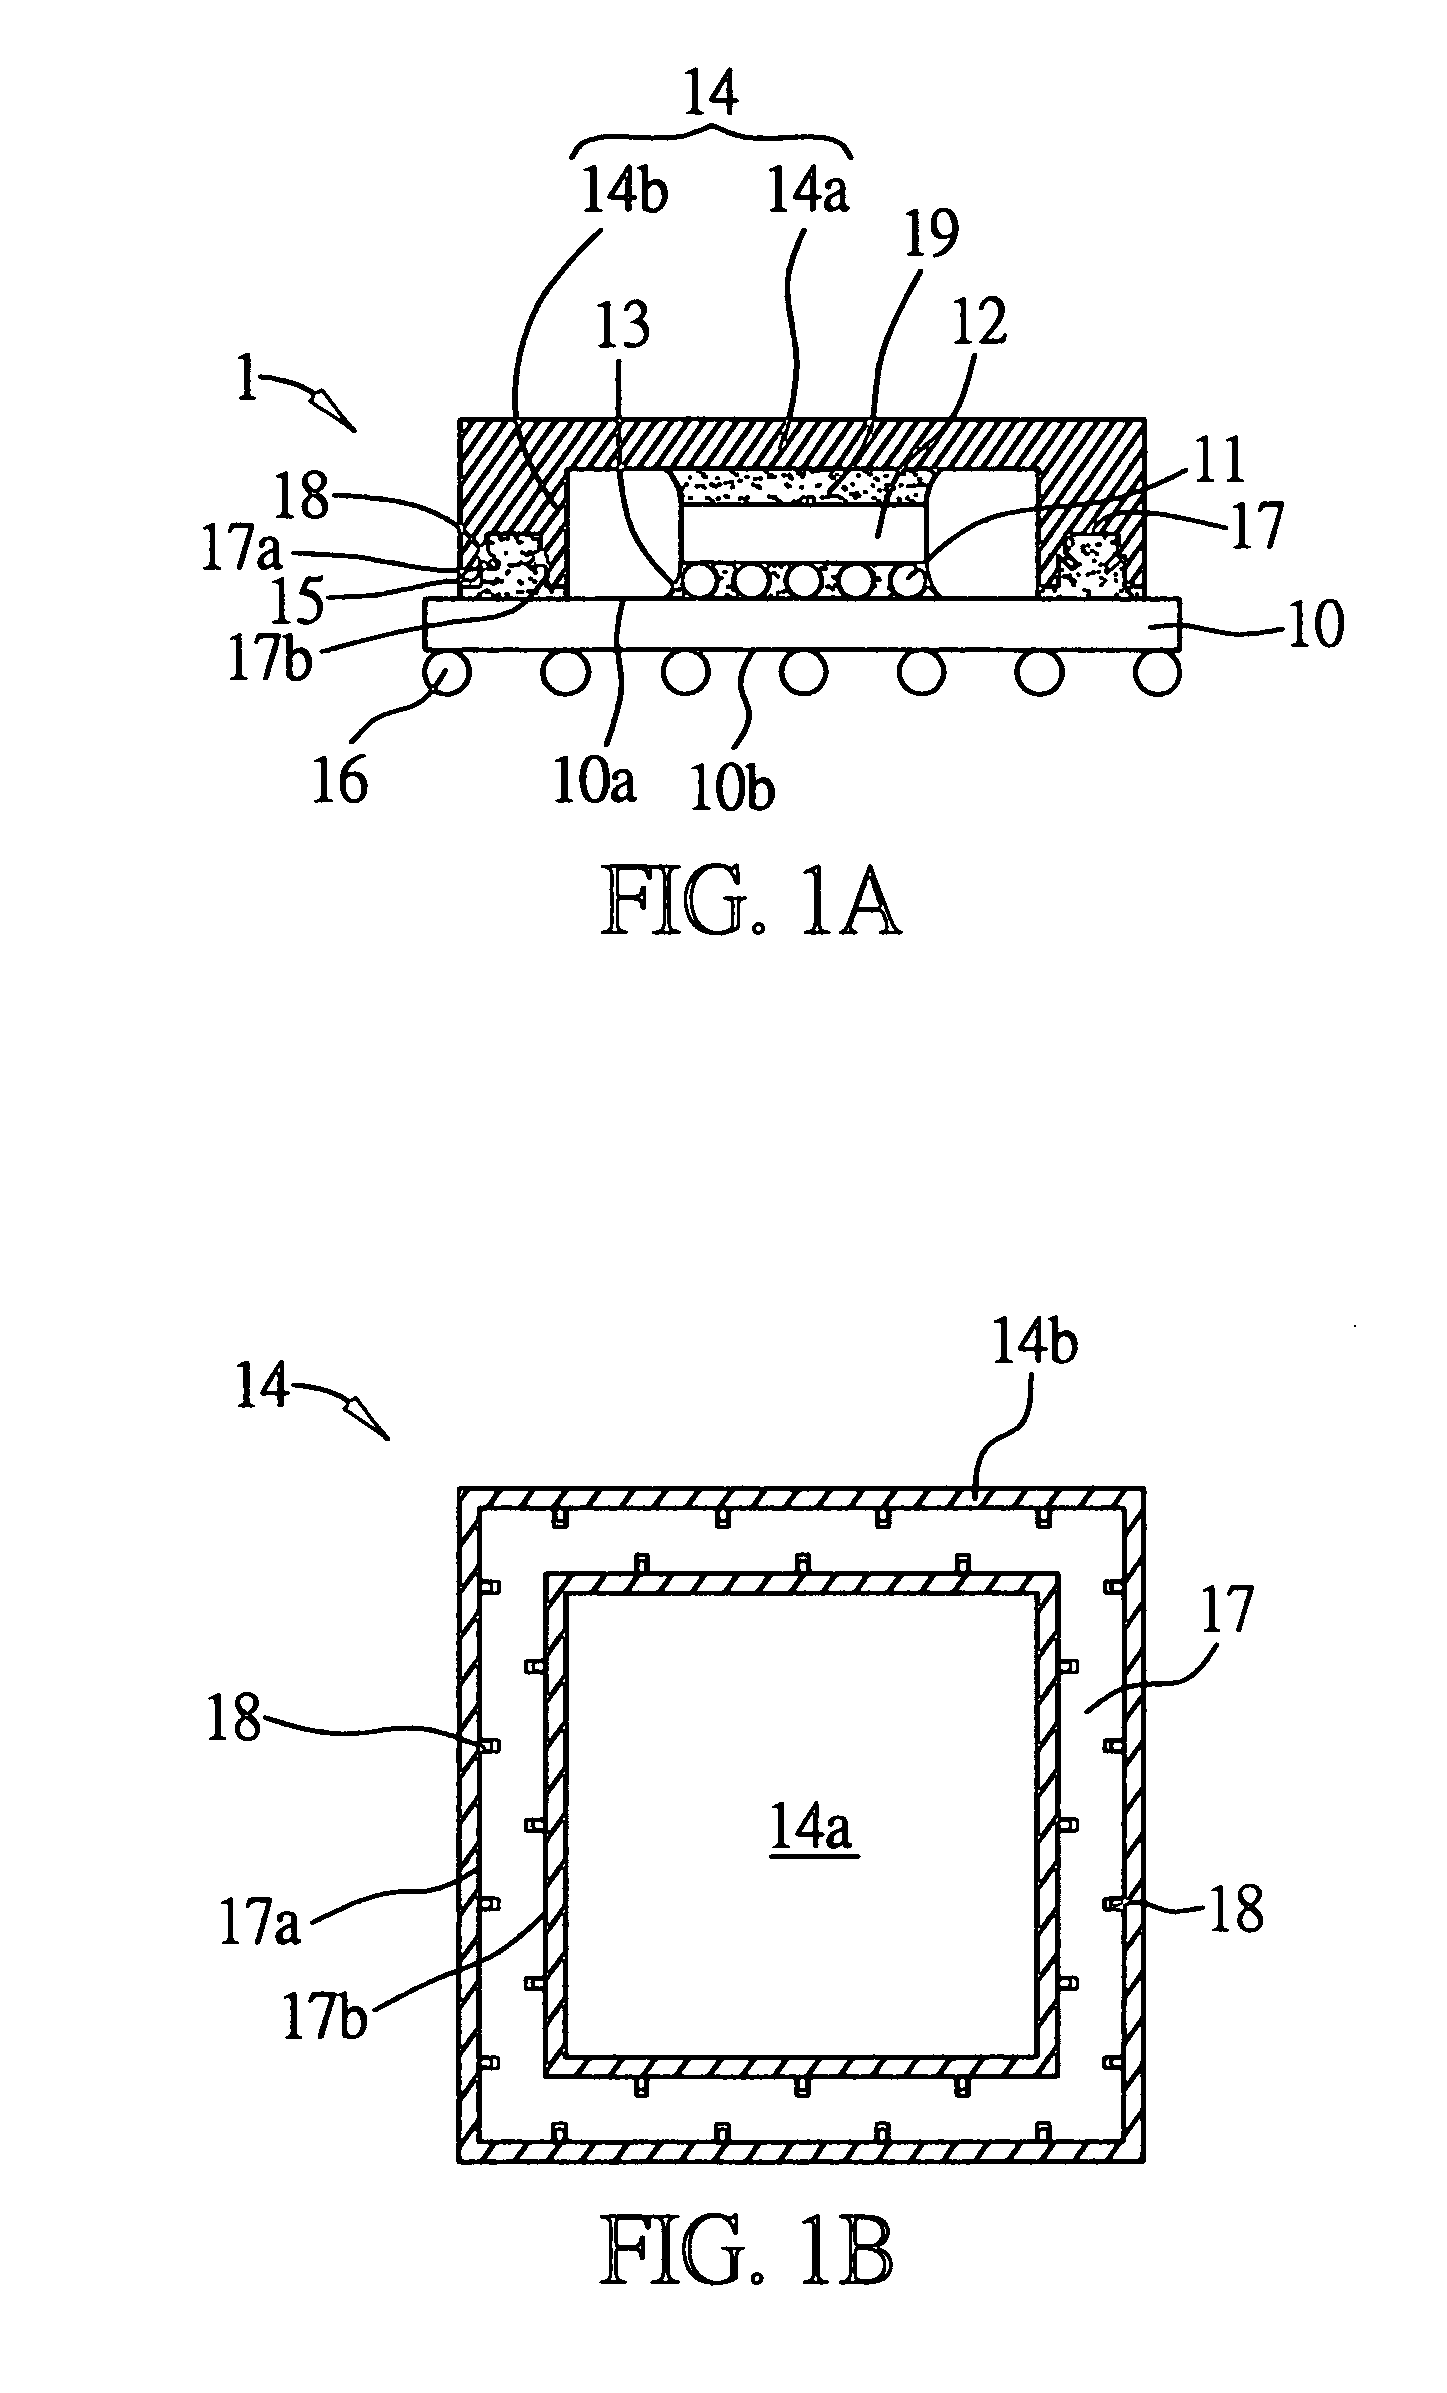 Semiconductor package with heat sink